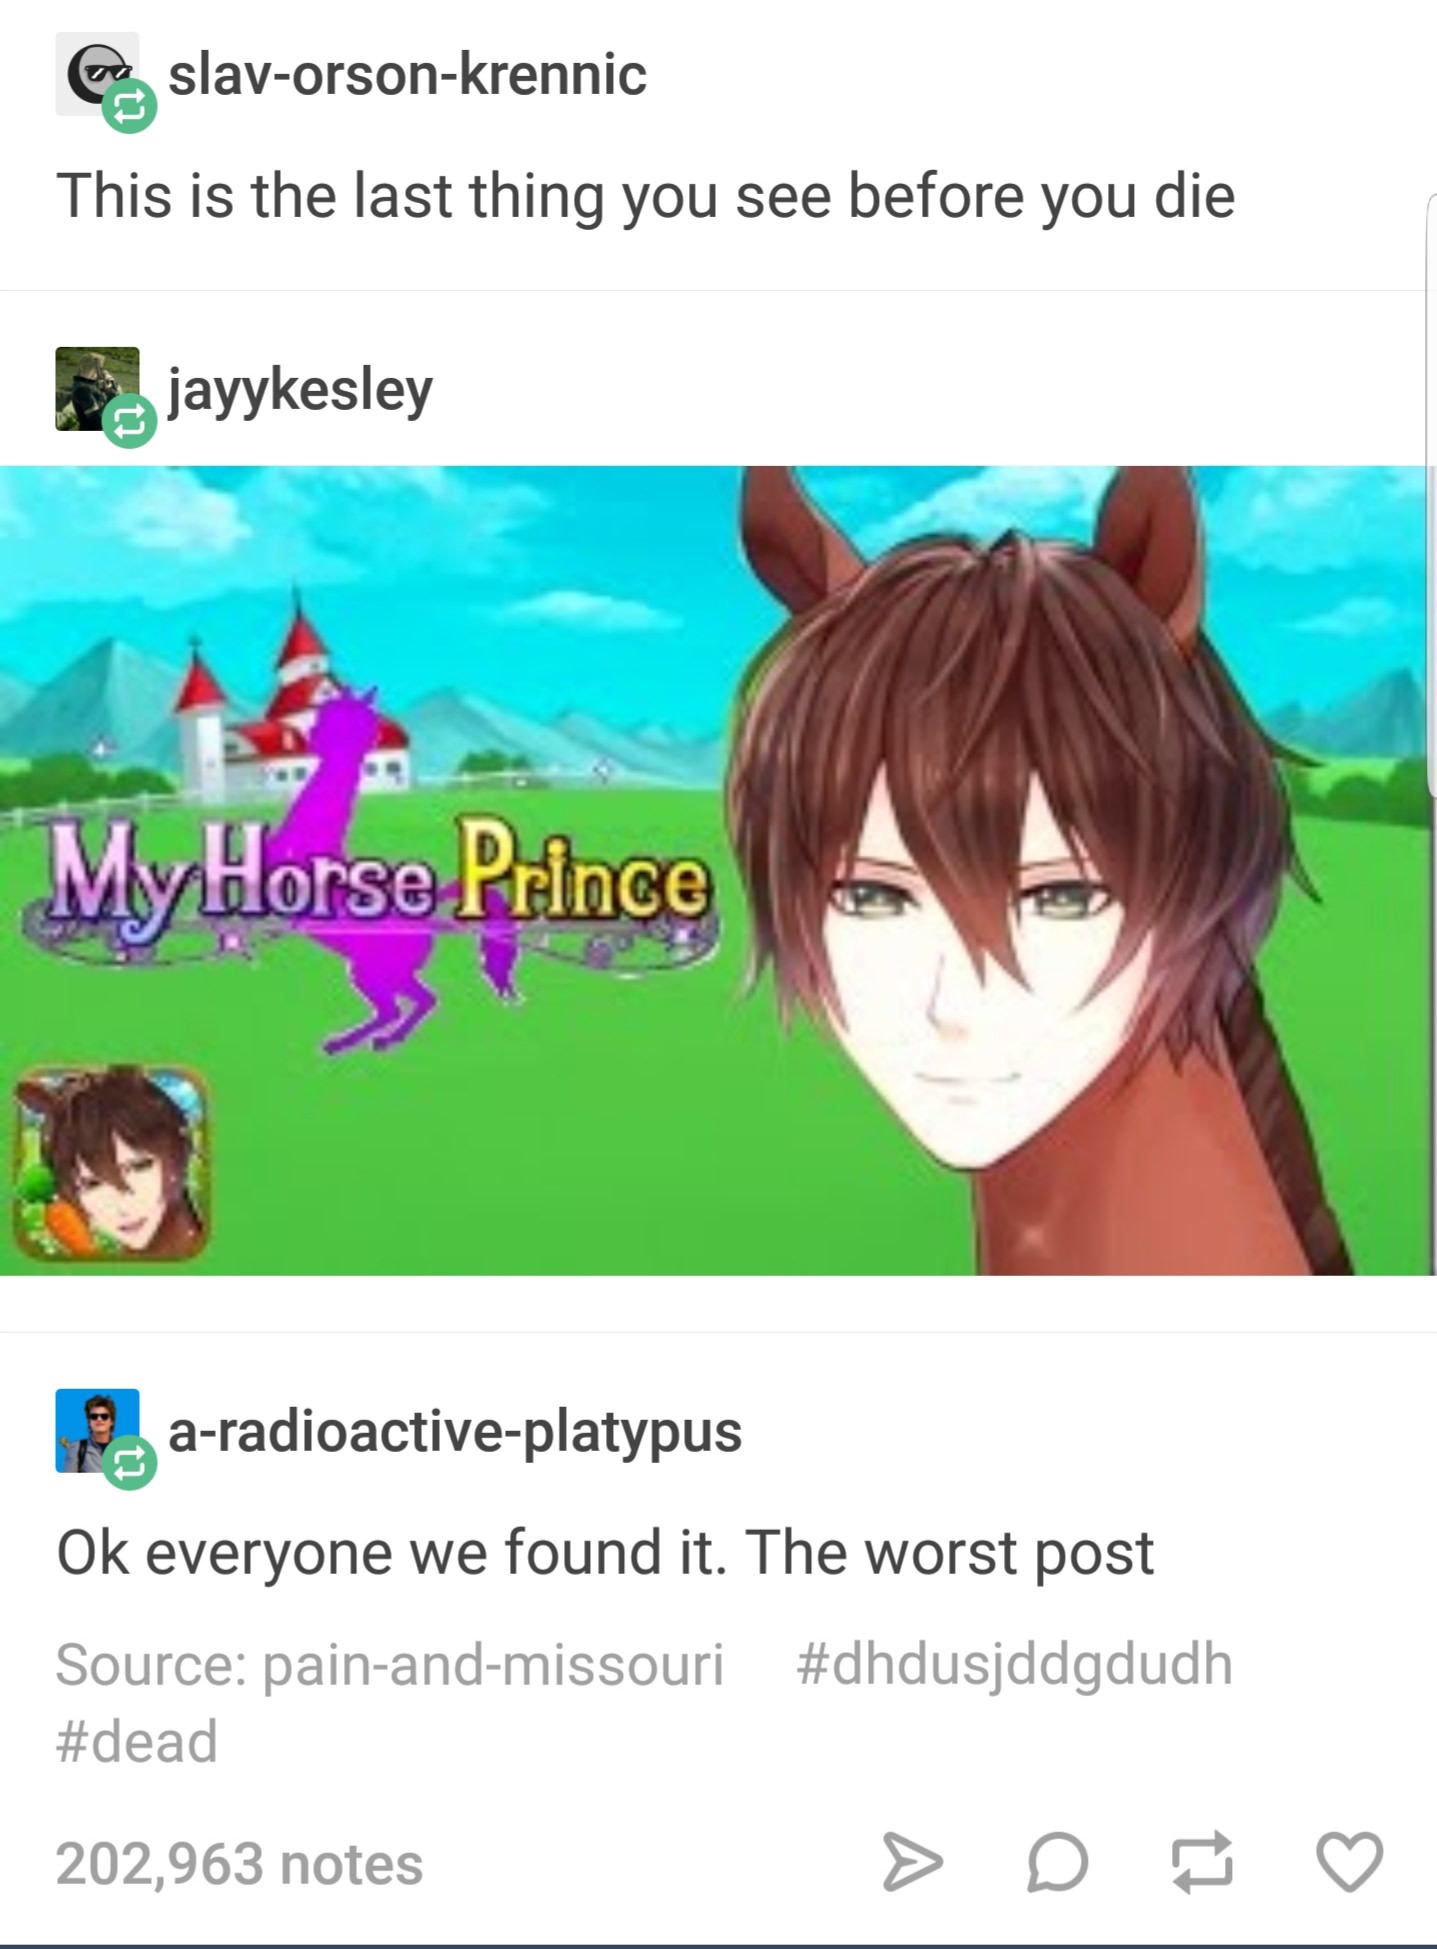 tumblr - my horse prince - slavorsonkrennic This is the last thing you see before you die jayykesley My Horse Prince y Horse Prince F. aradioactiveplatypus Ok everyone we found it. The worst post Source painandmissouri 202,963 notes